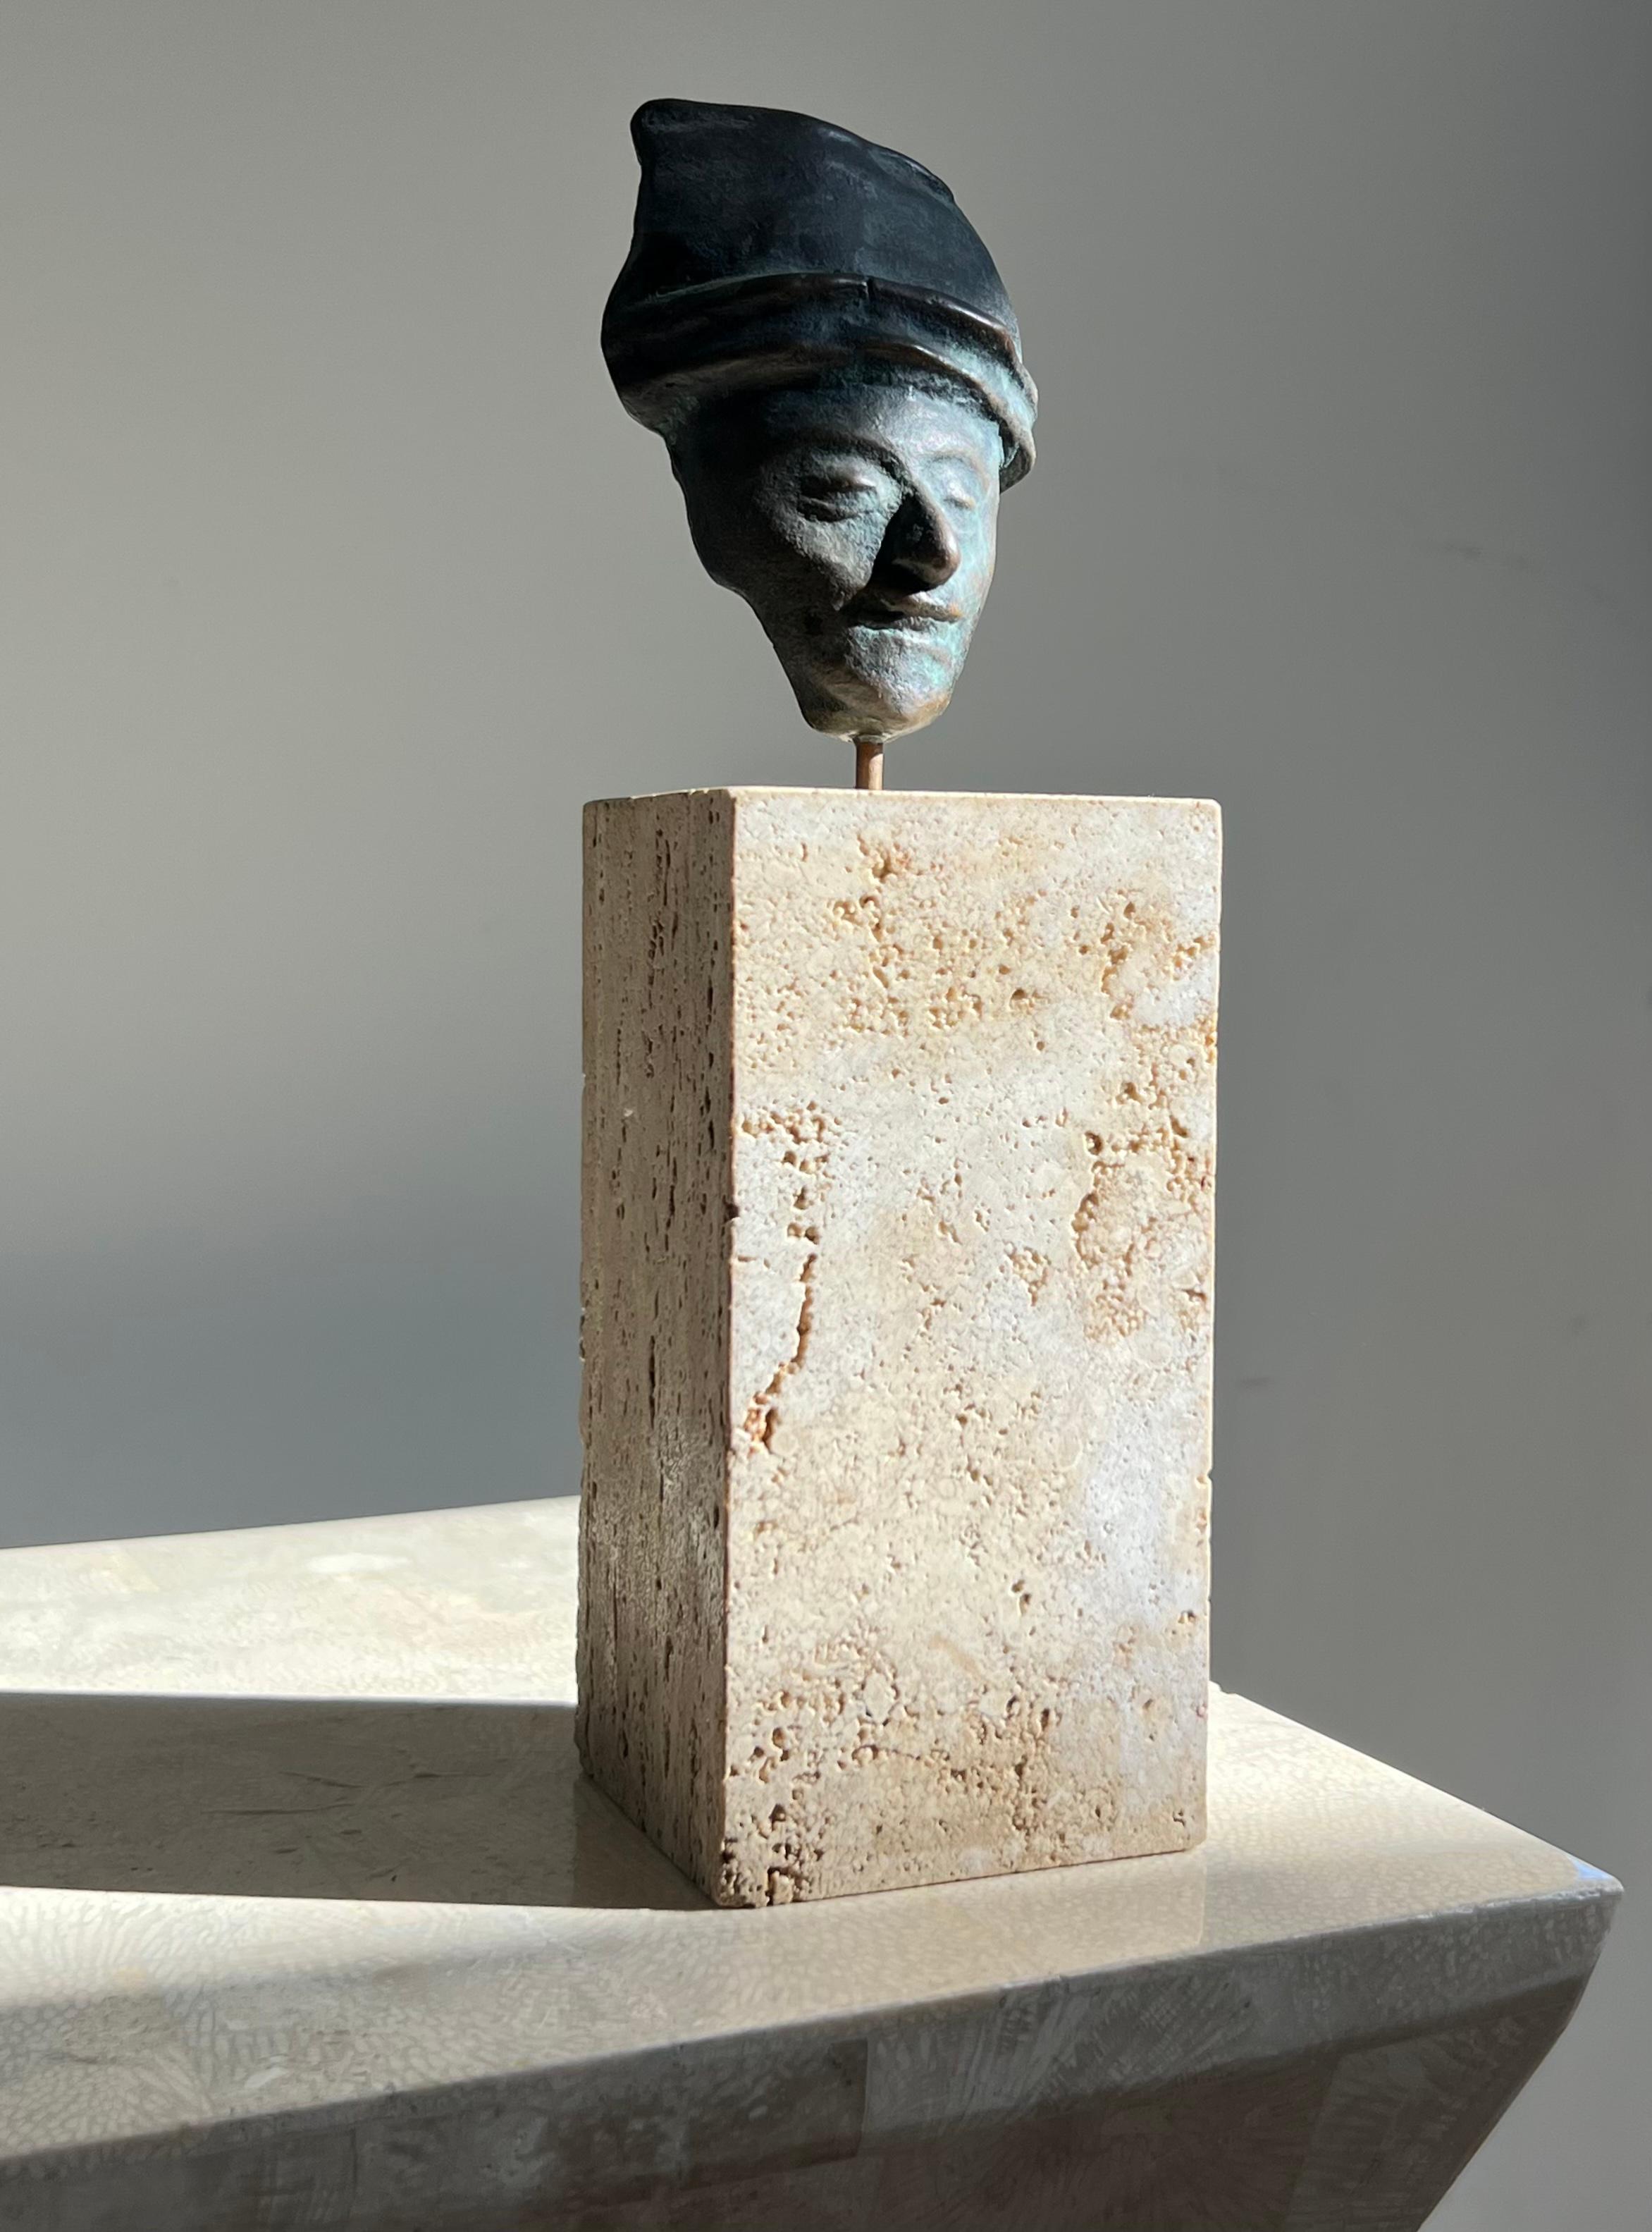 A Neo Sumerian style bronze sculpture of a face, mounted on a raw travertine plinth, 20th century. The felted bottom also shows a sticker from a now shuttered antique store in Santa Monica where the relic was once sold; beyond that, the piece is